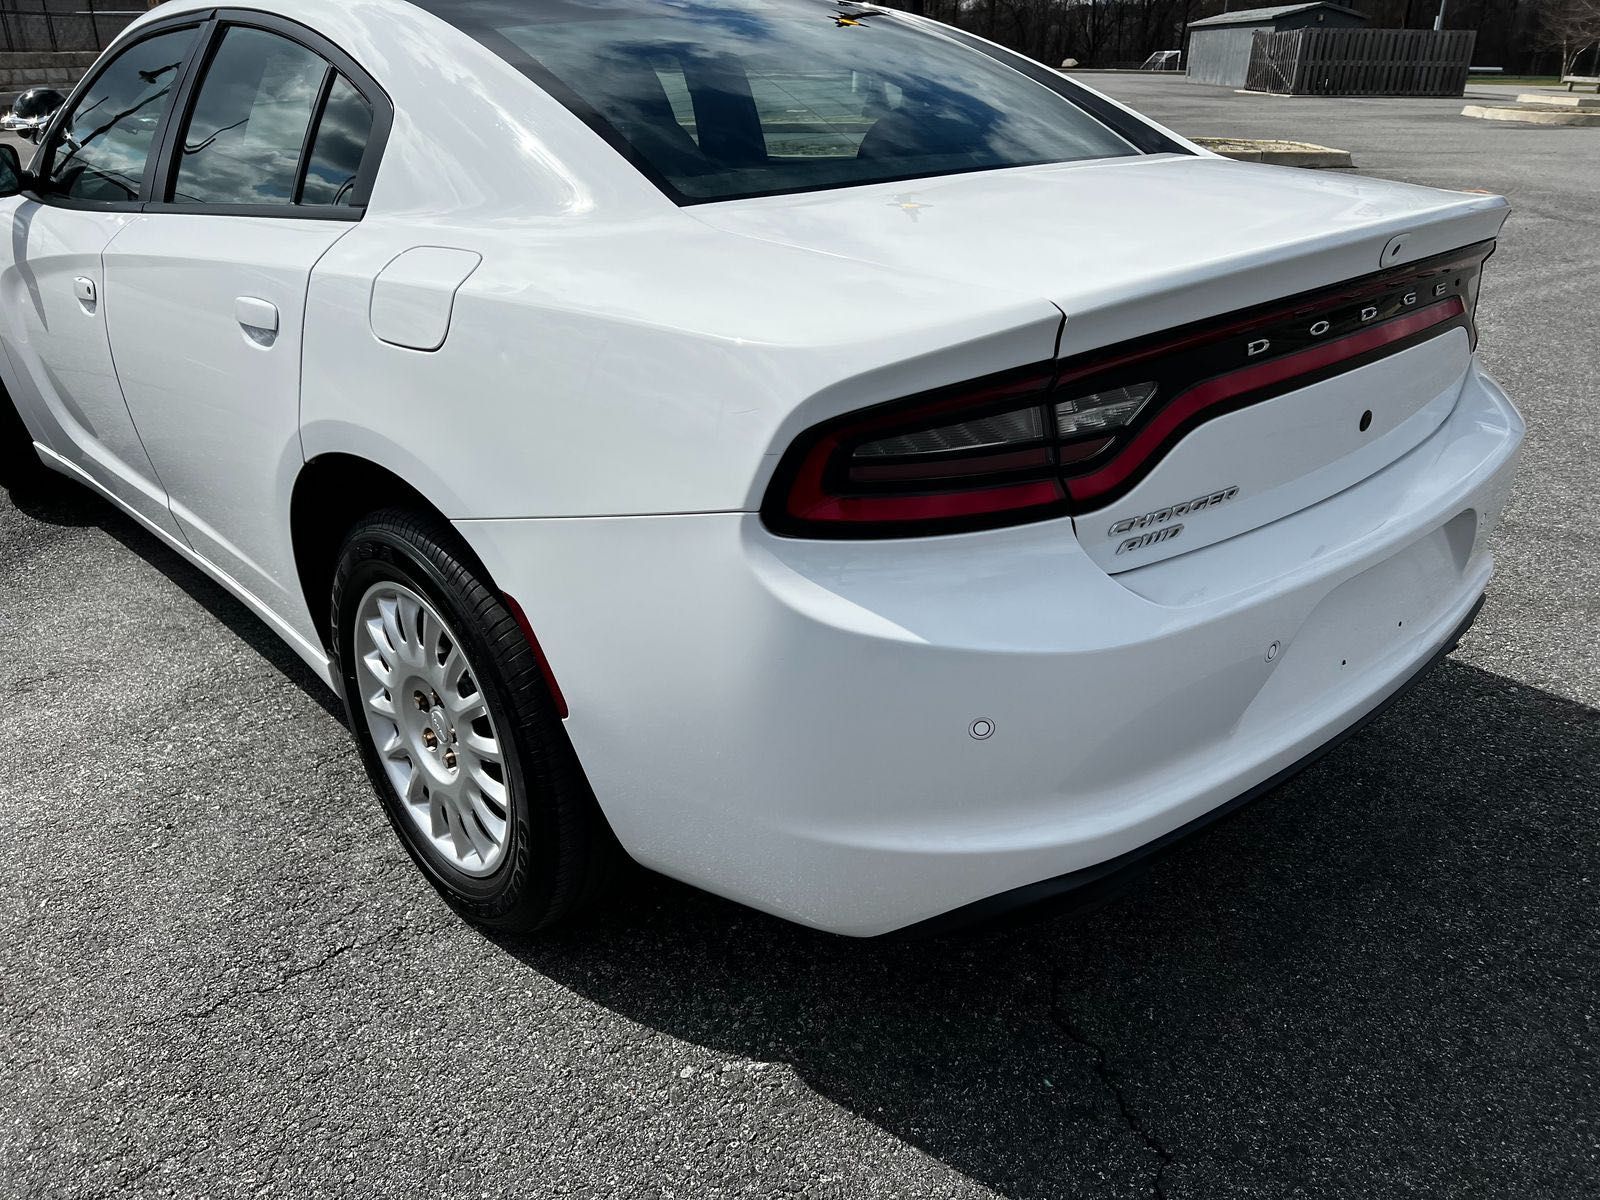 2019 Dodge Charger Police